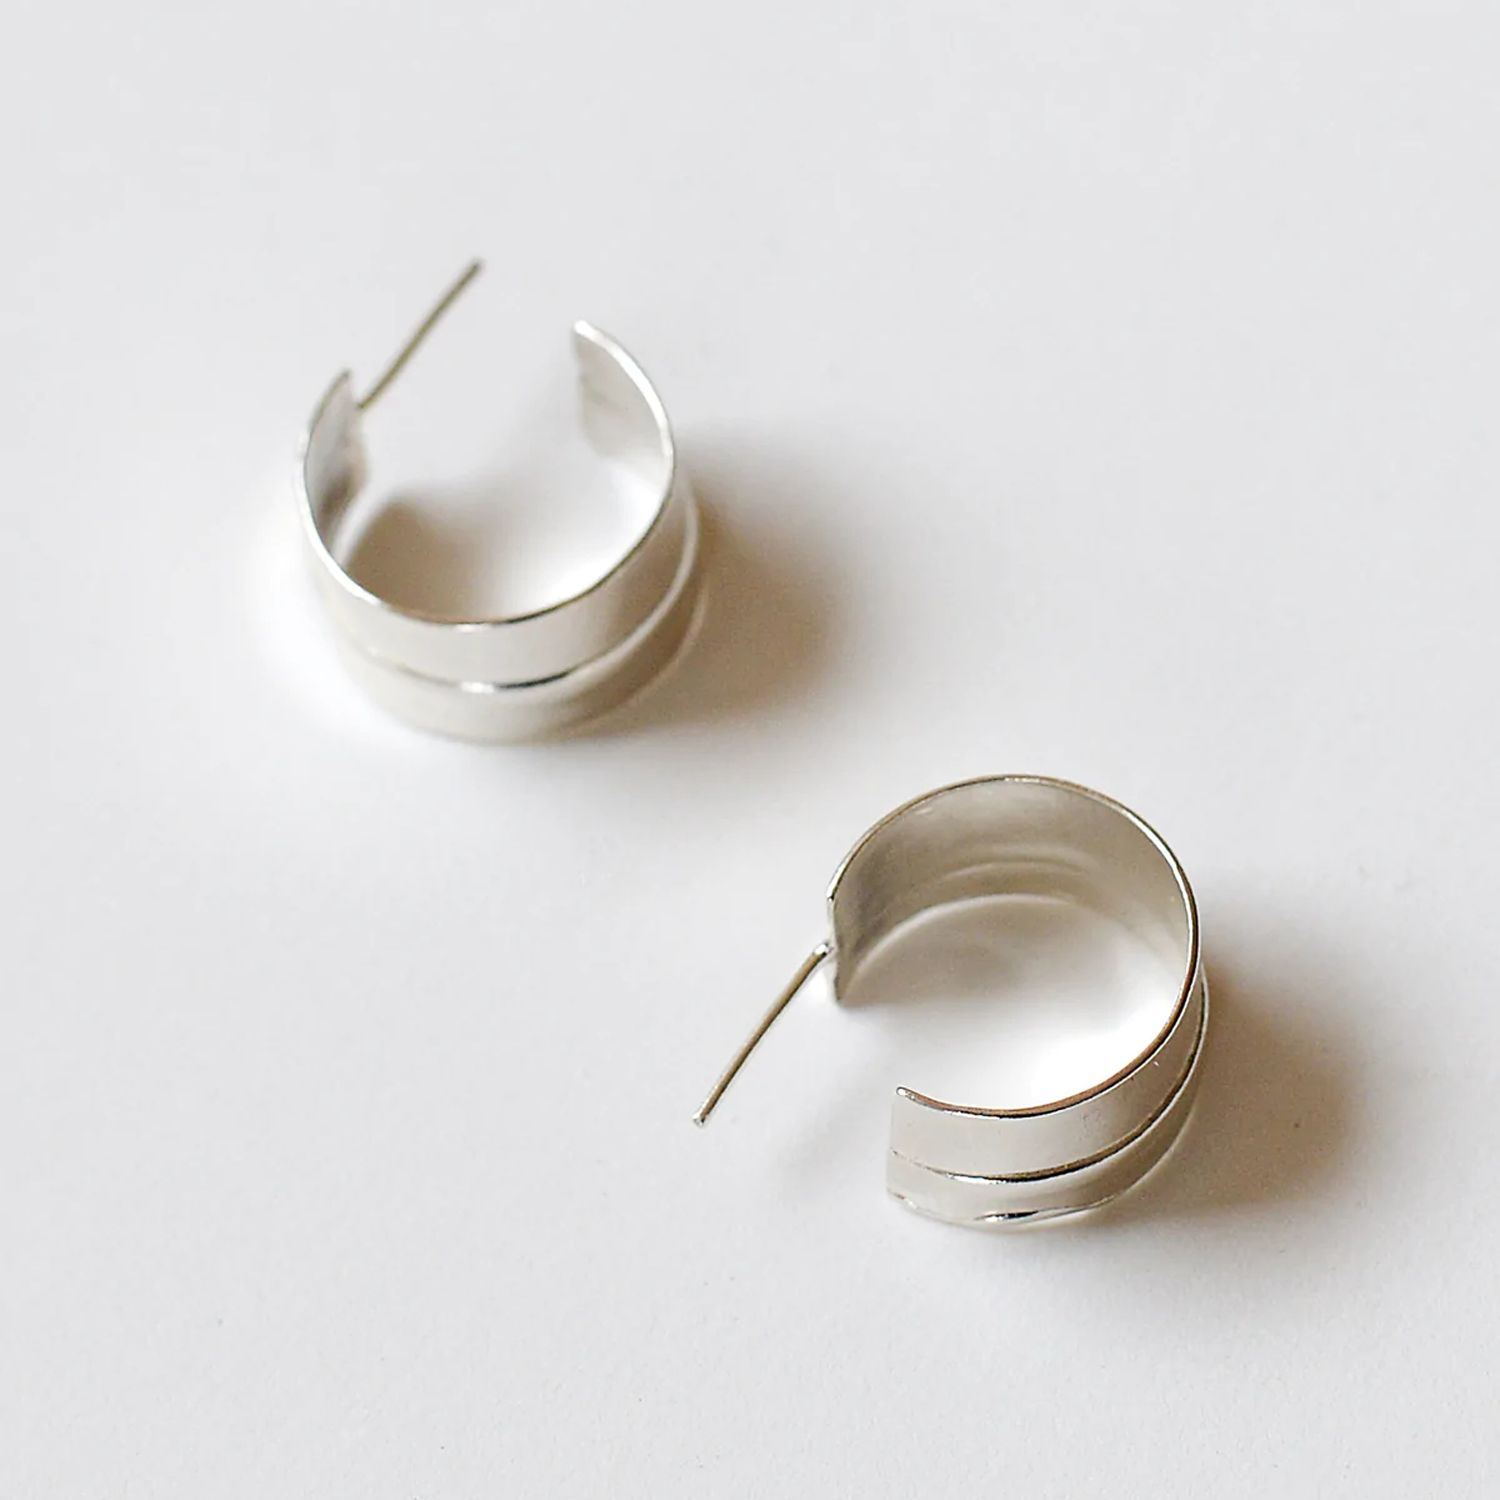 Michelle Ross: Kaida Earrings Large (Silver) Product Image 3 of 3